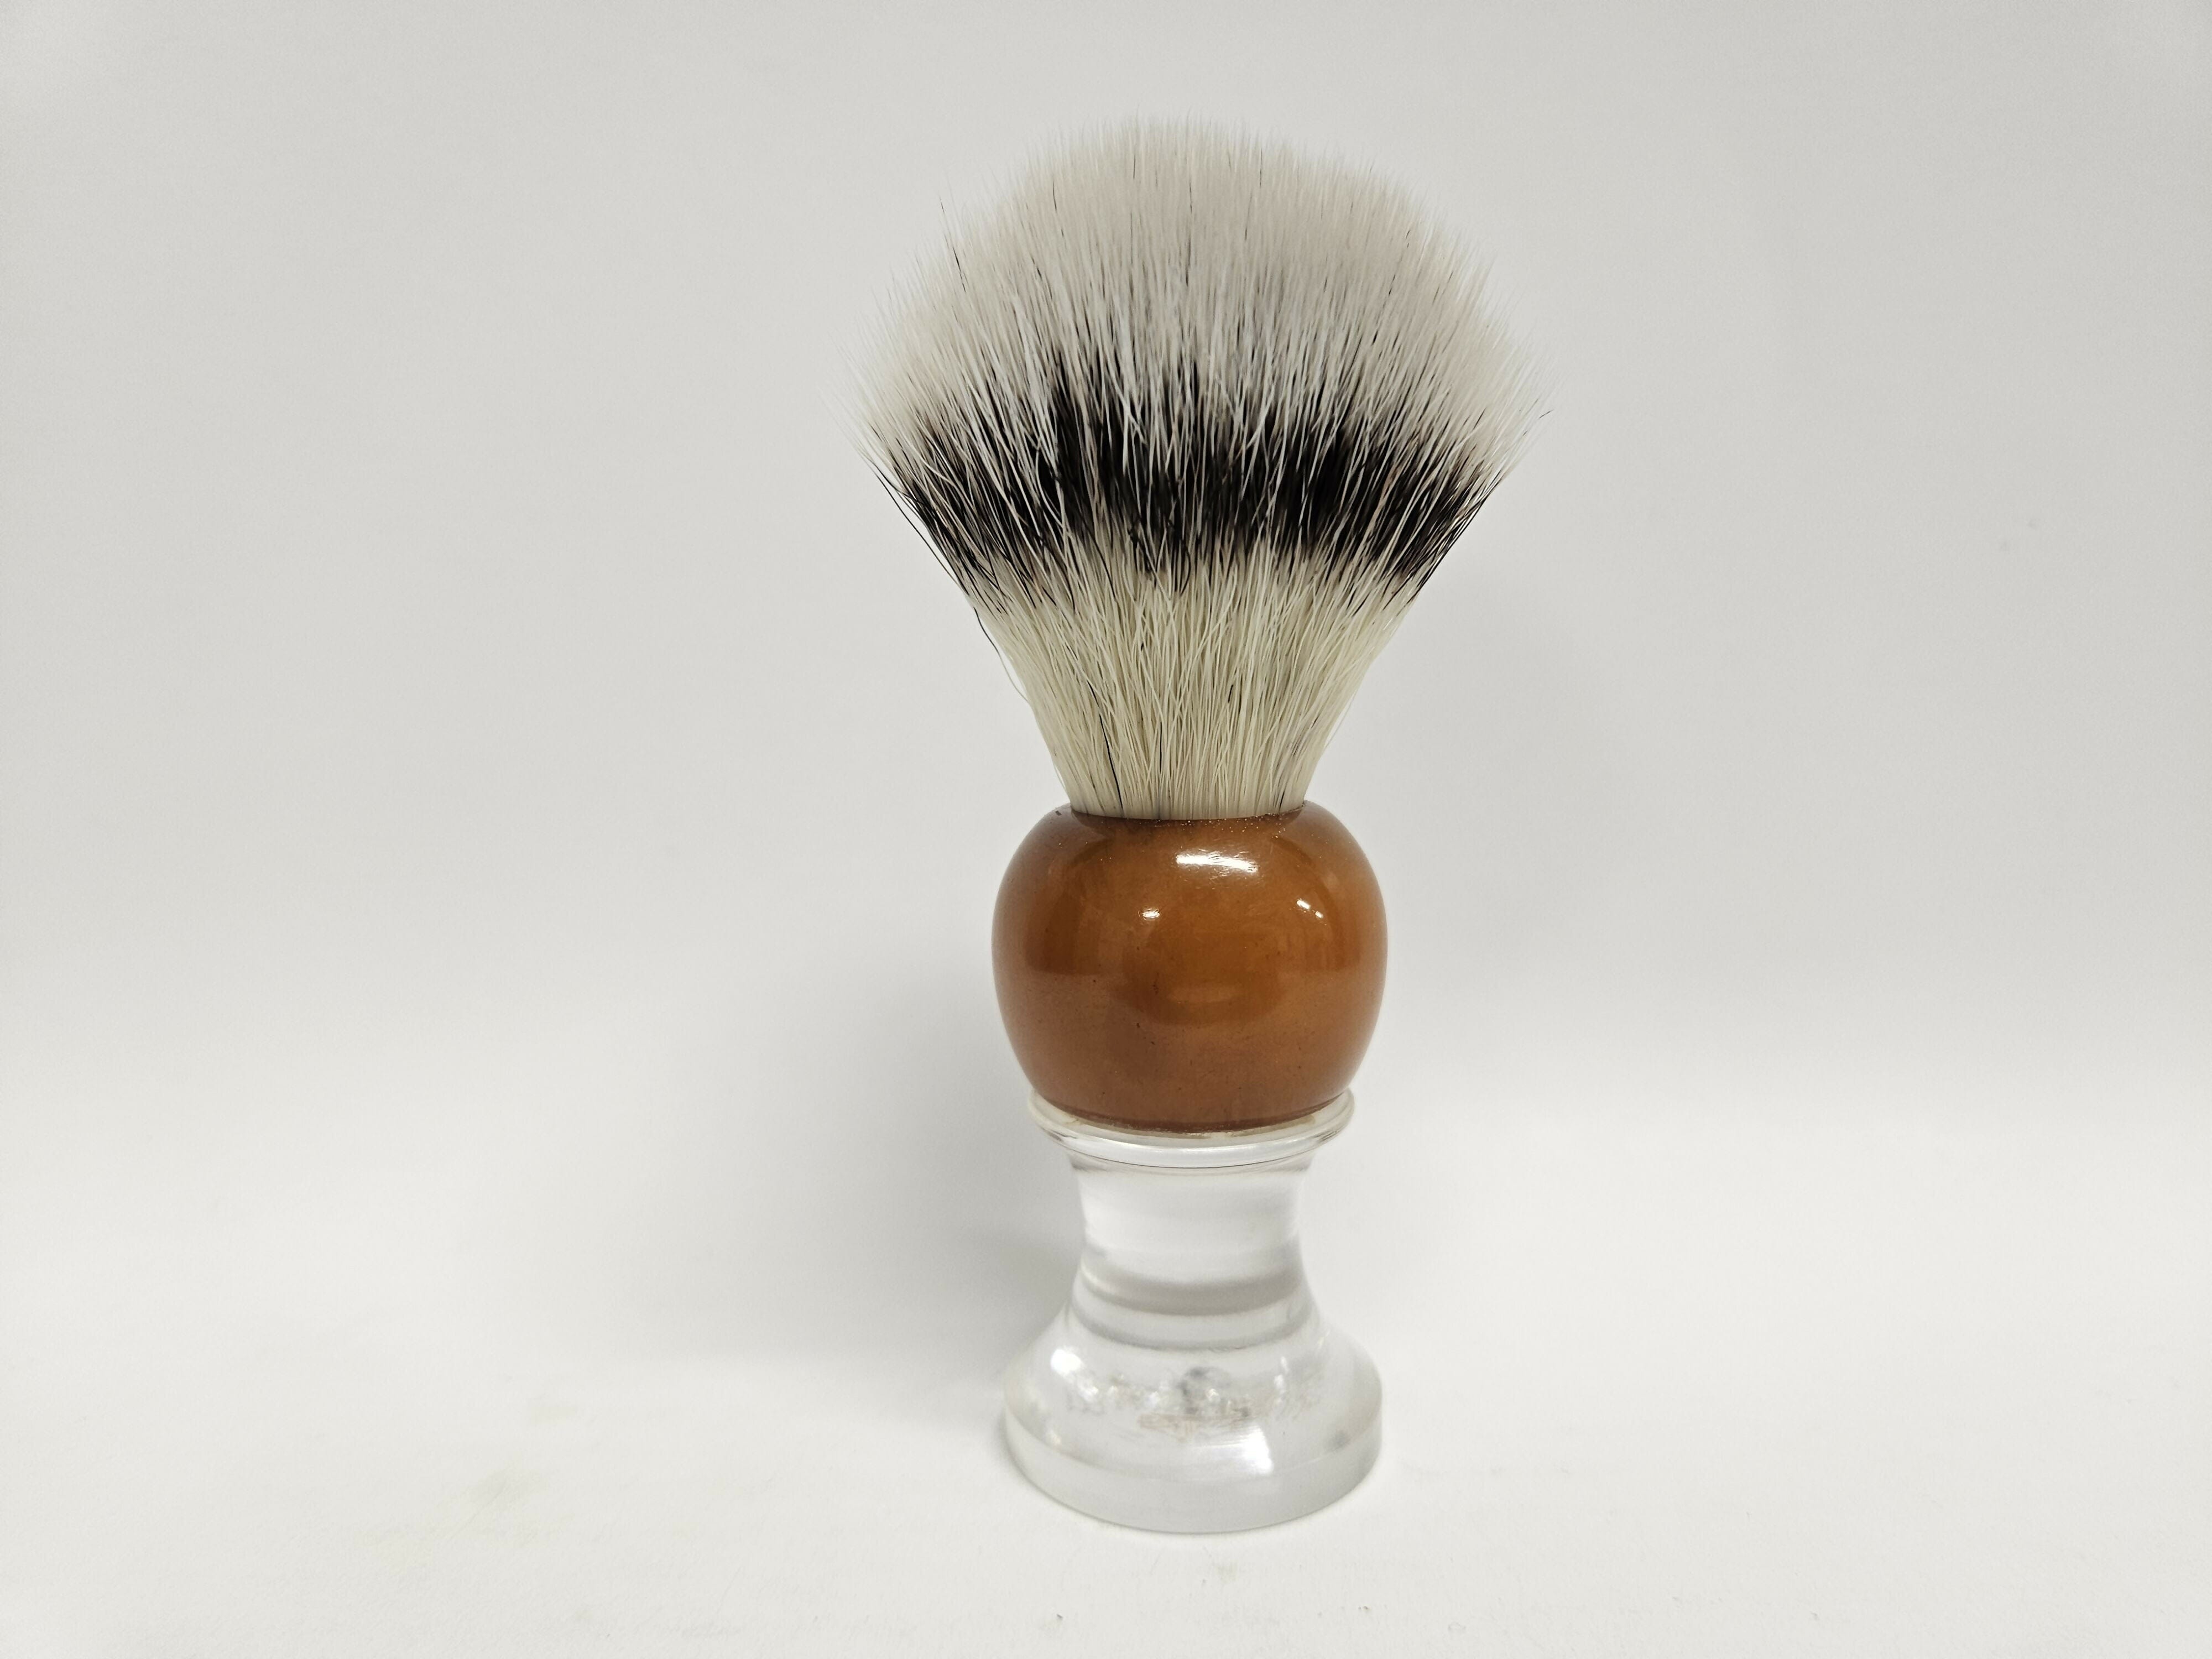 Vintage Plymouth 20mm Shave Brush Shaving Brush Talent Soap Factory 